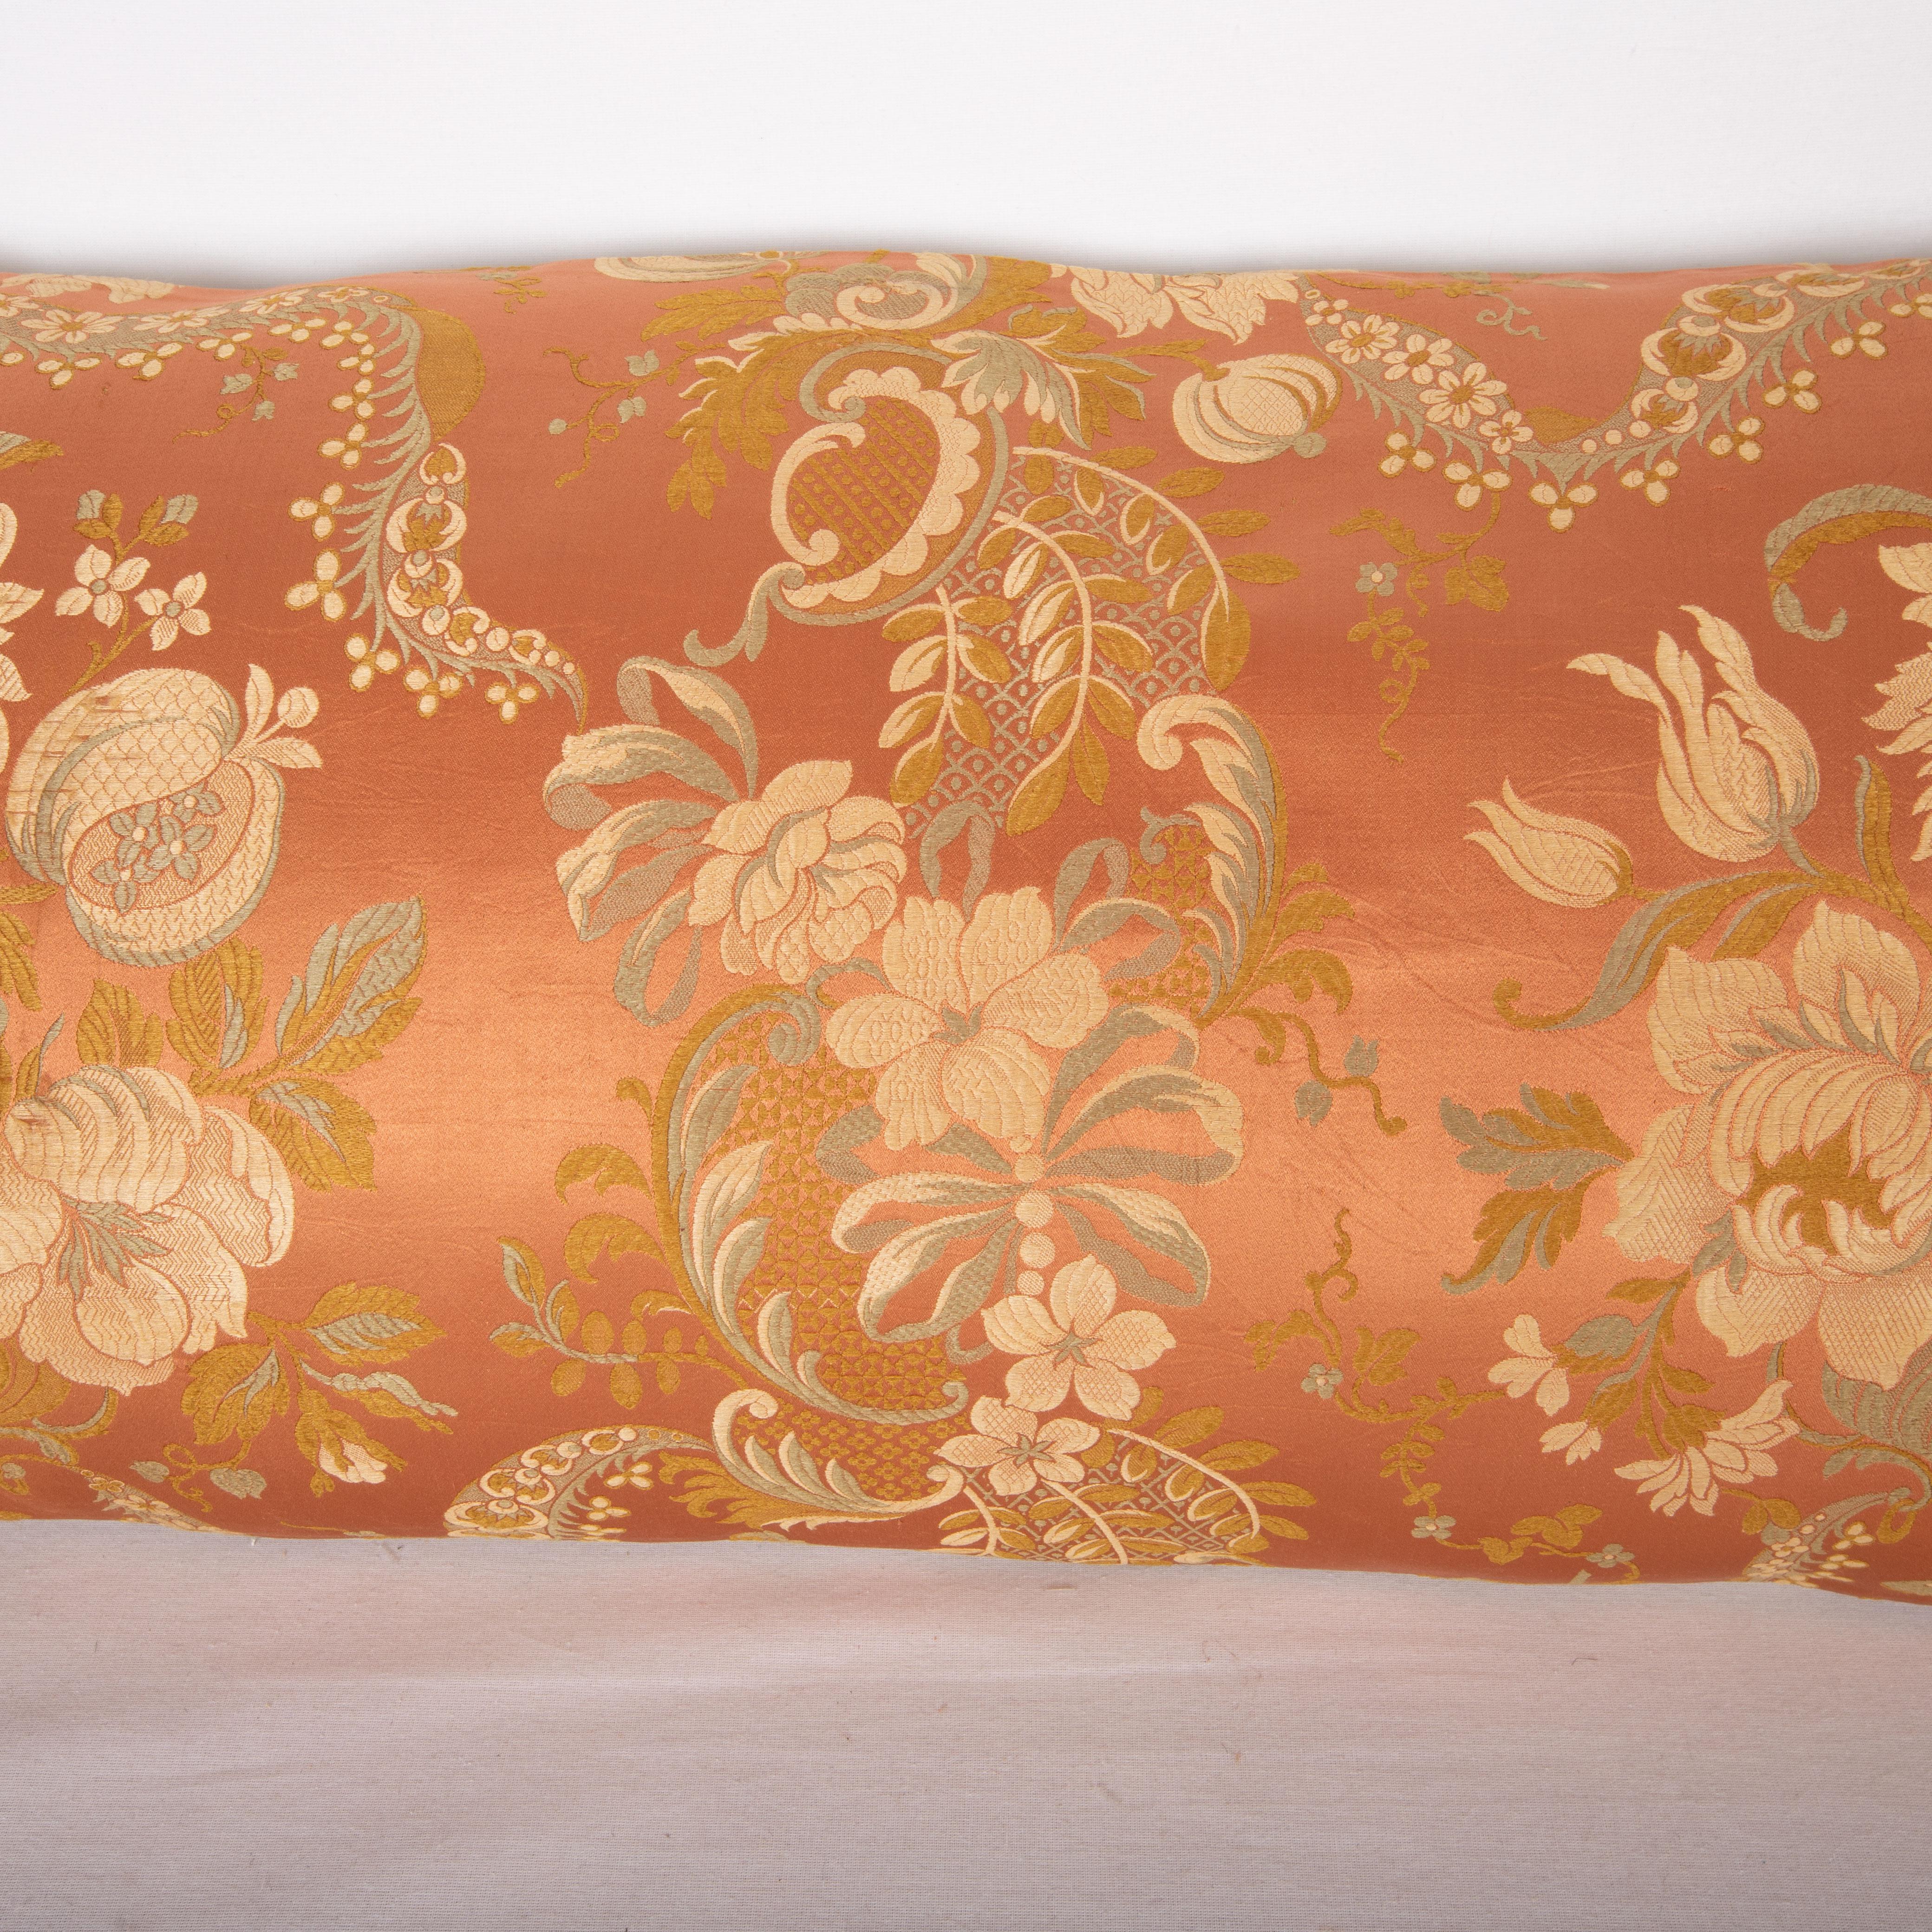 Woven Antique Pillow Case Made from an Early 20th C. Silk Brocade For Sale